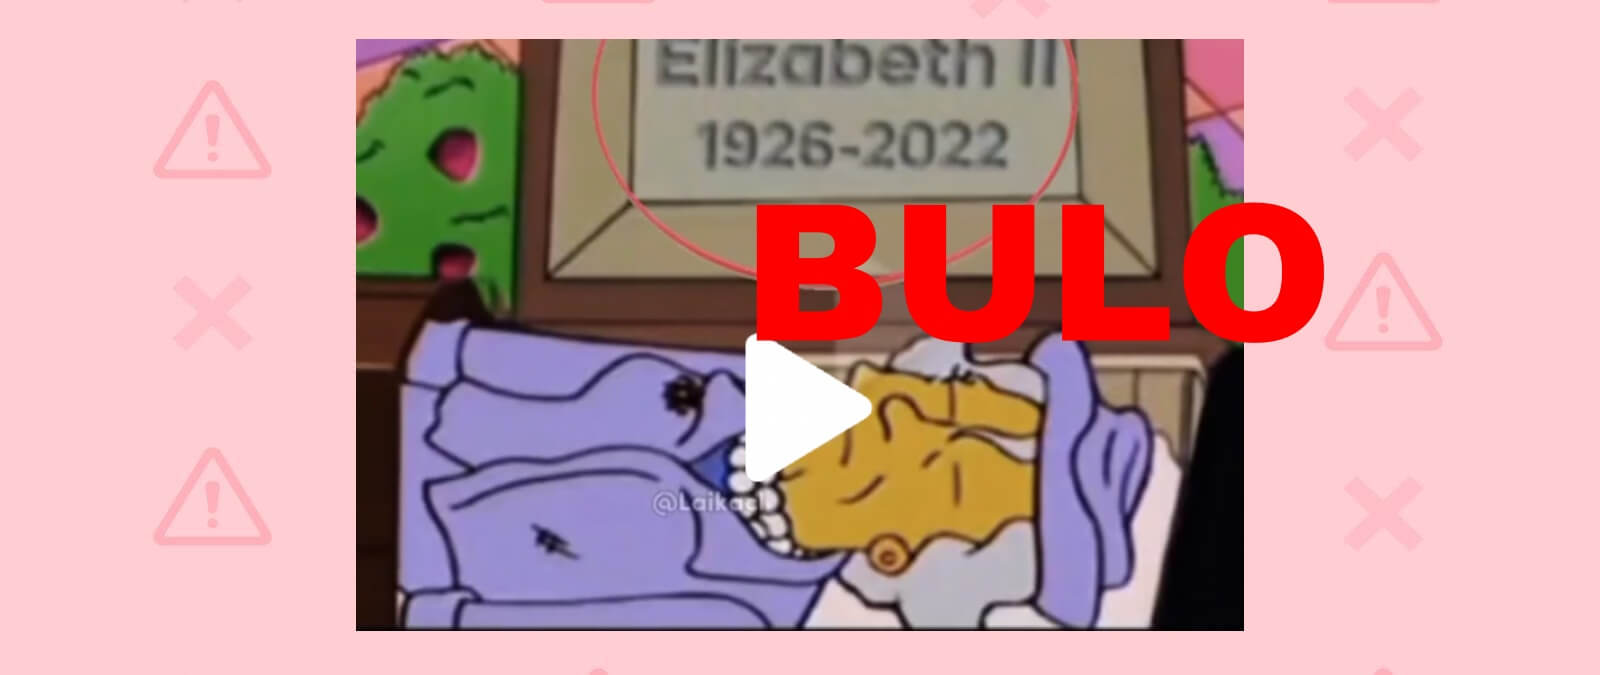 Image of the alleged scene where the Simpsons predicted the year of Elizabeth II's death.